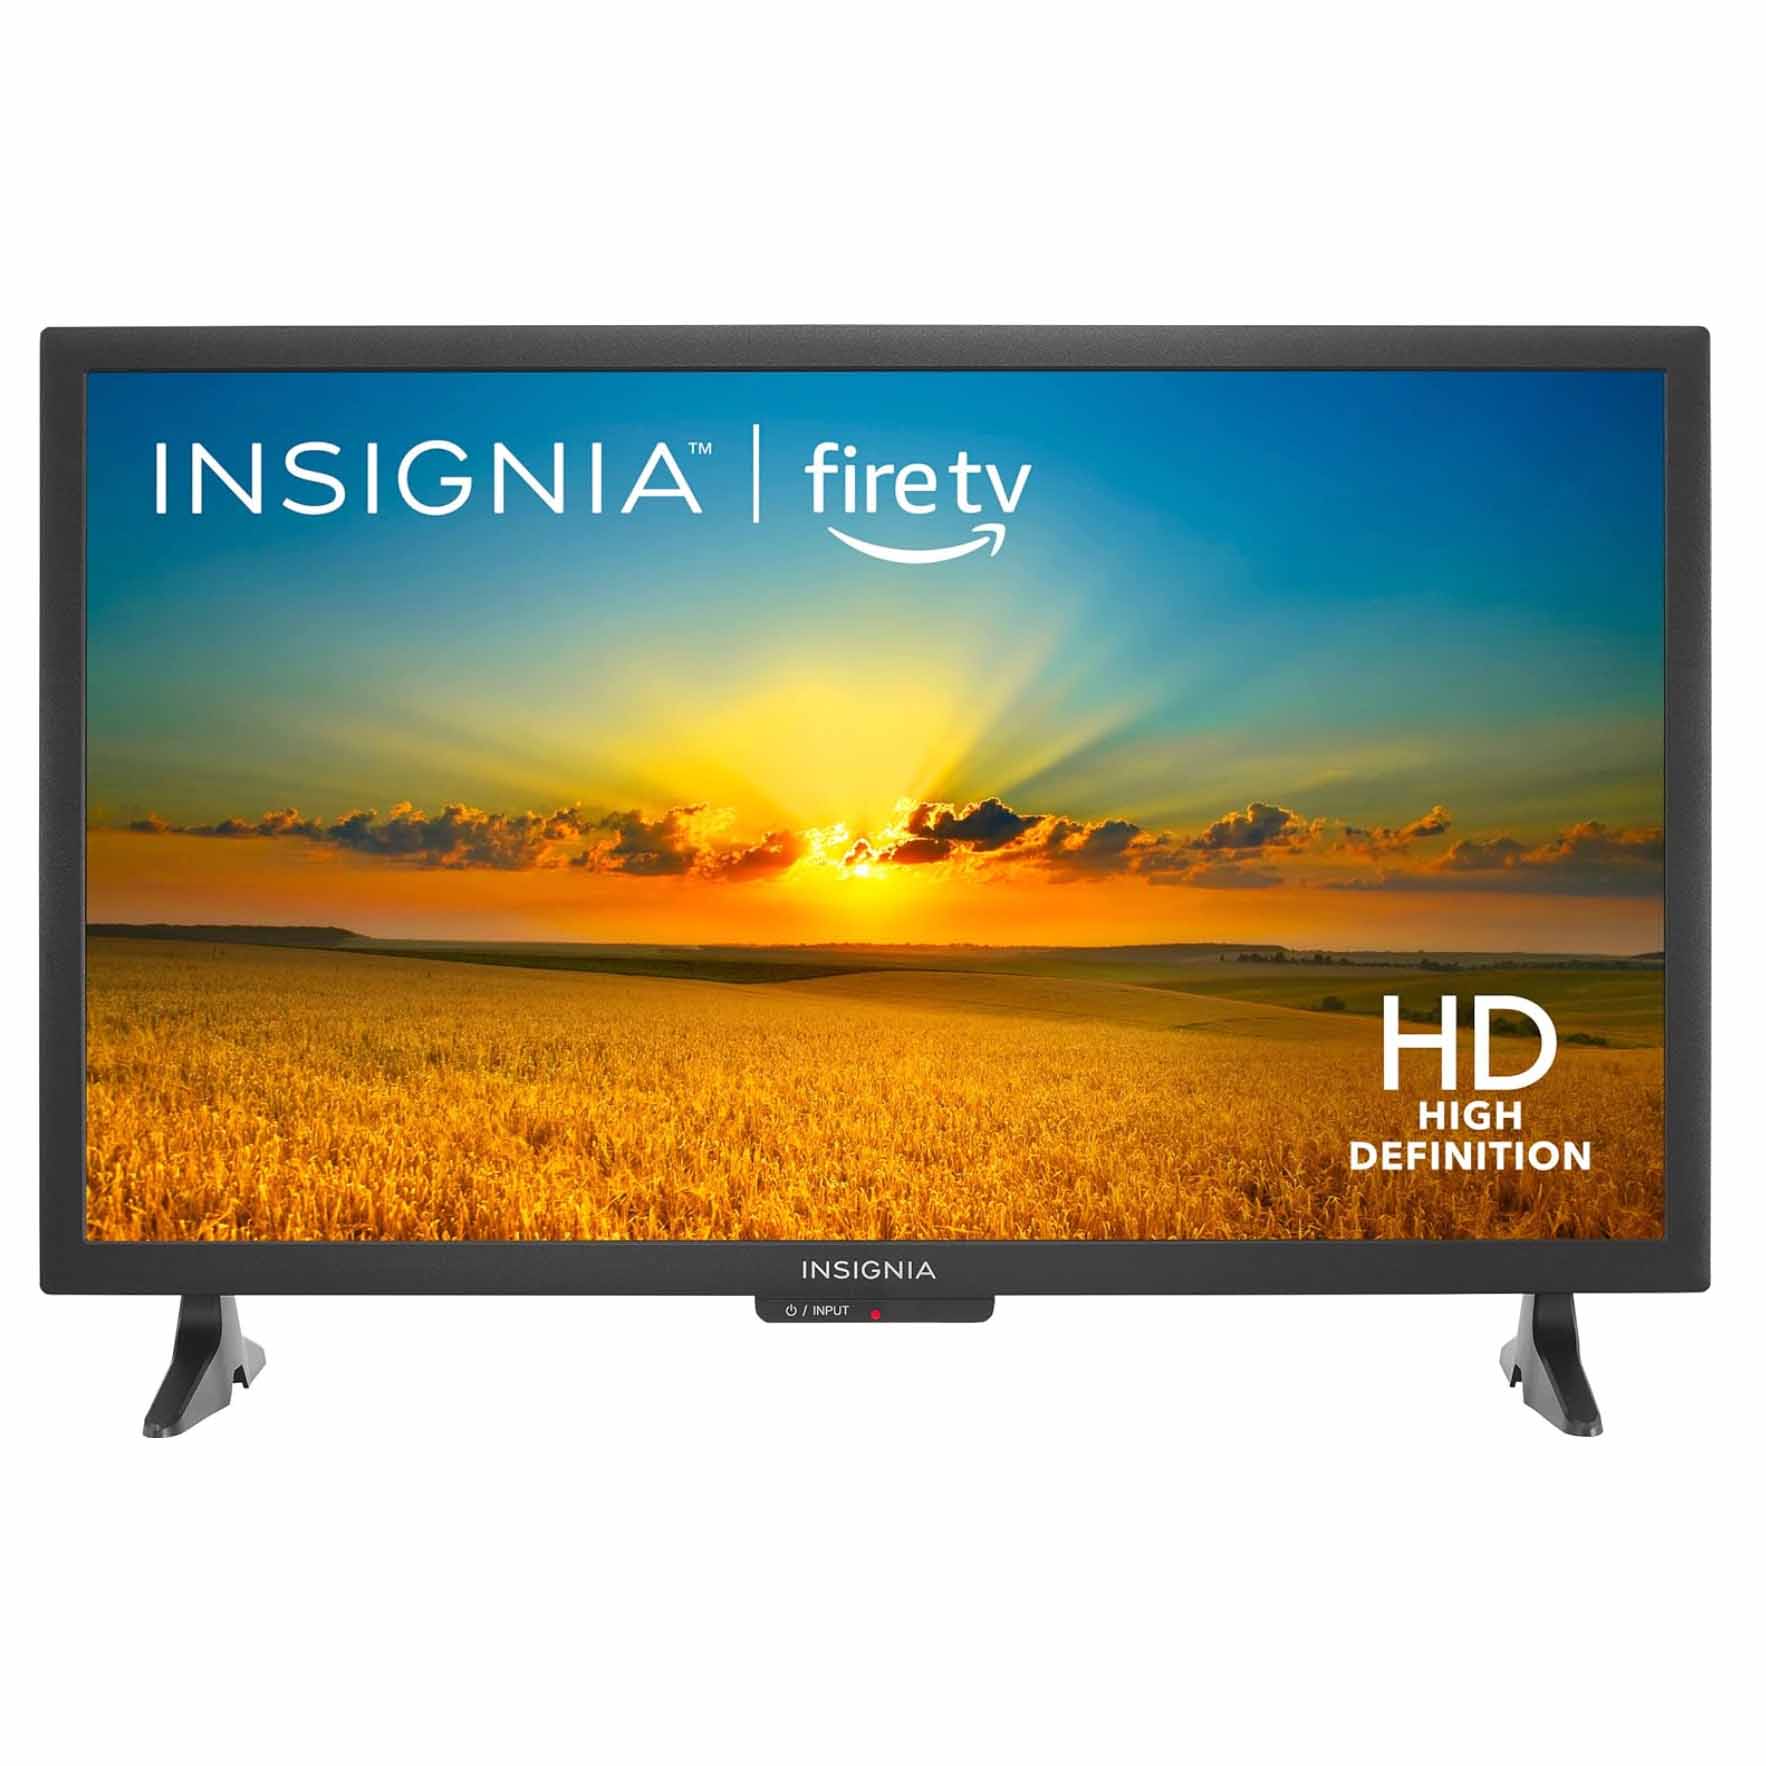 Insignia TV on stand with display